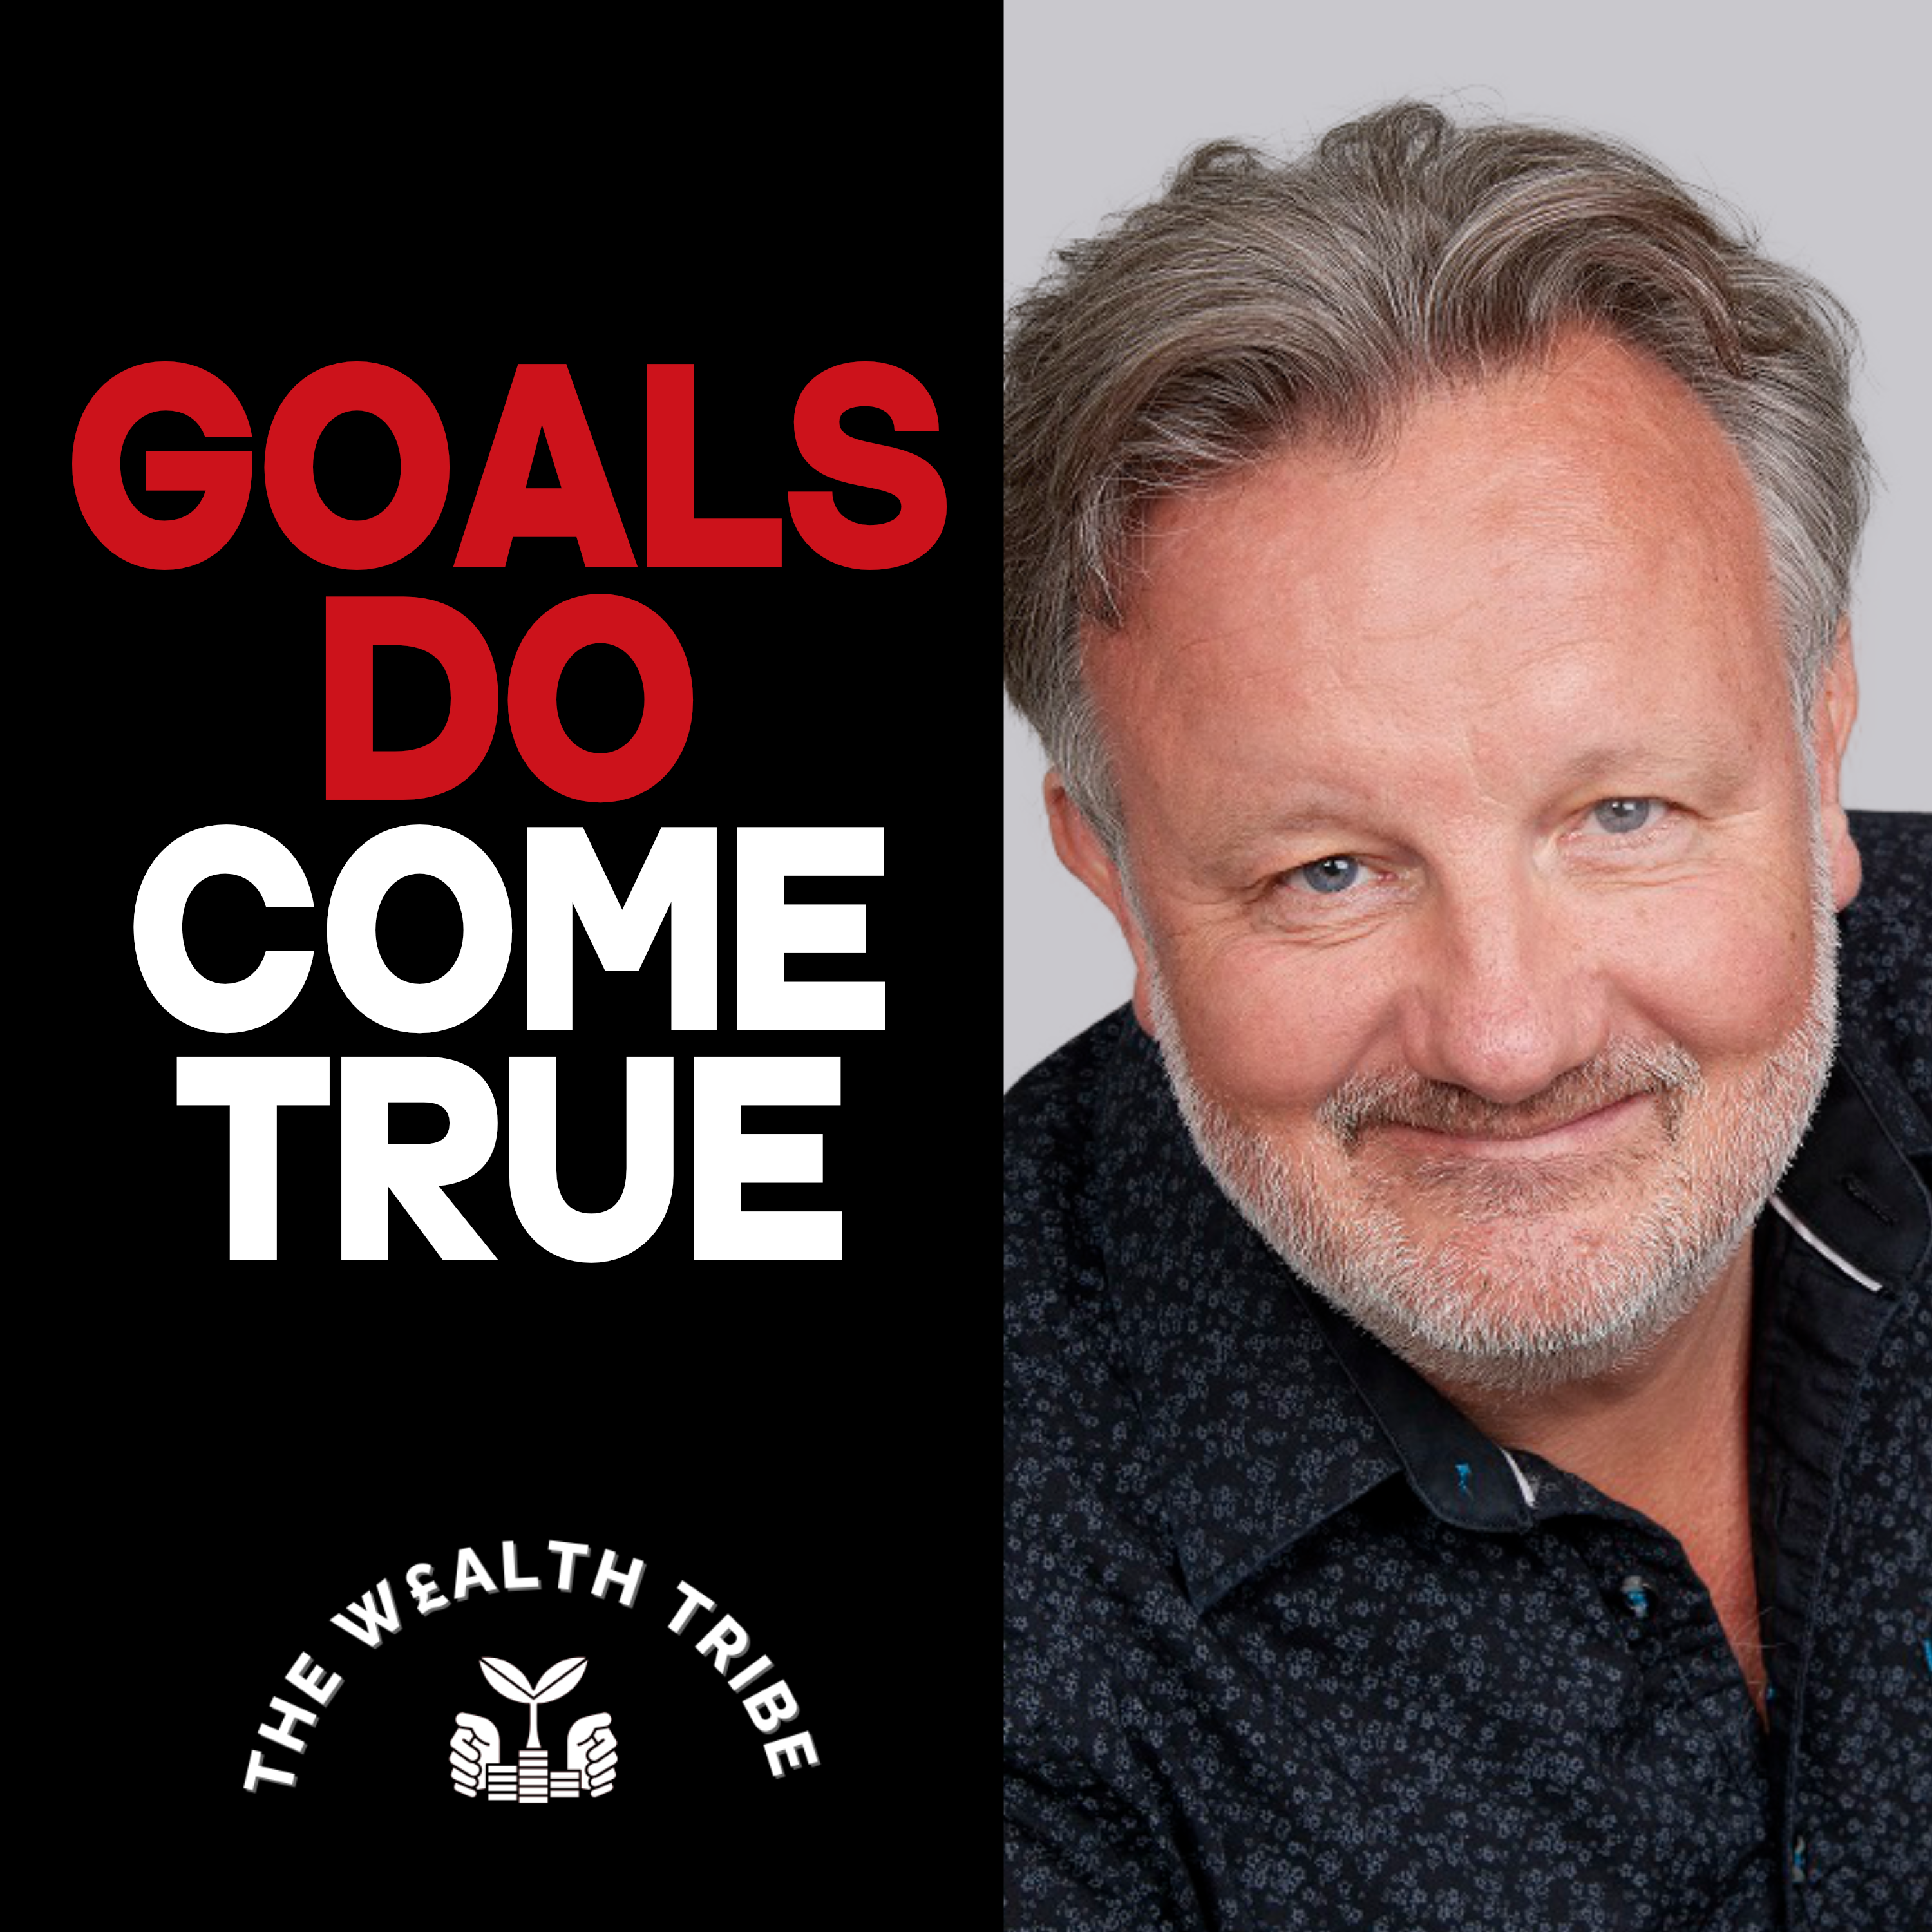 EP 41: How Setting Goals Is Crucial To Breaking Free and Living Your Dreams with Sarah-Jane Lewis